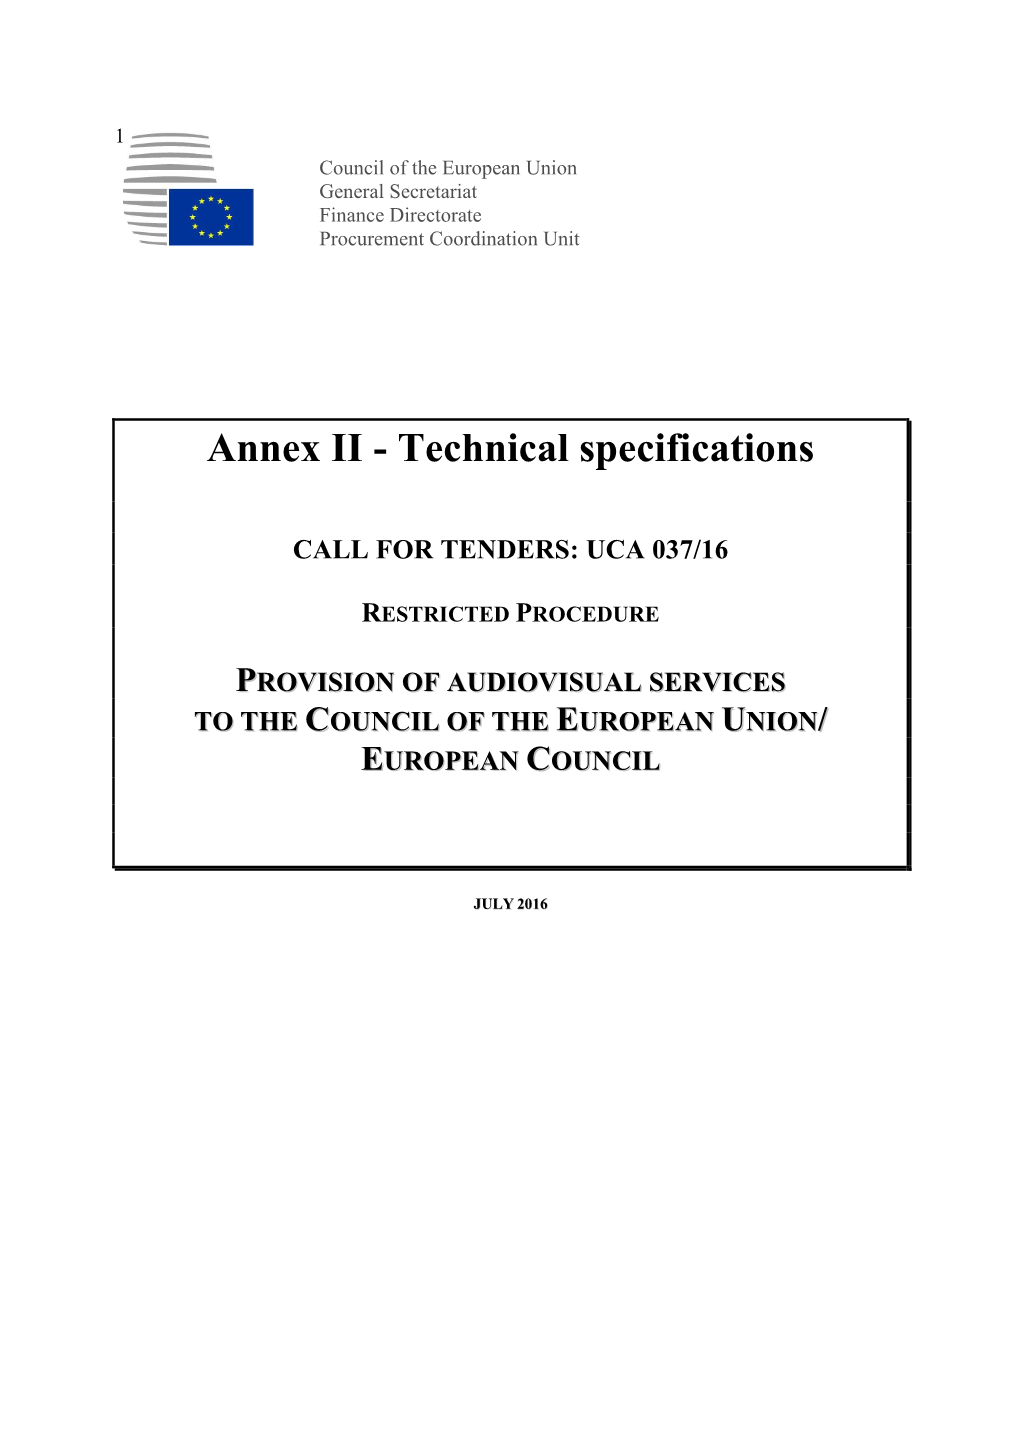 Annex II - Technical Specifications